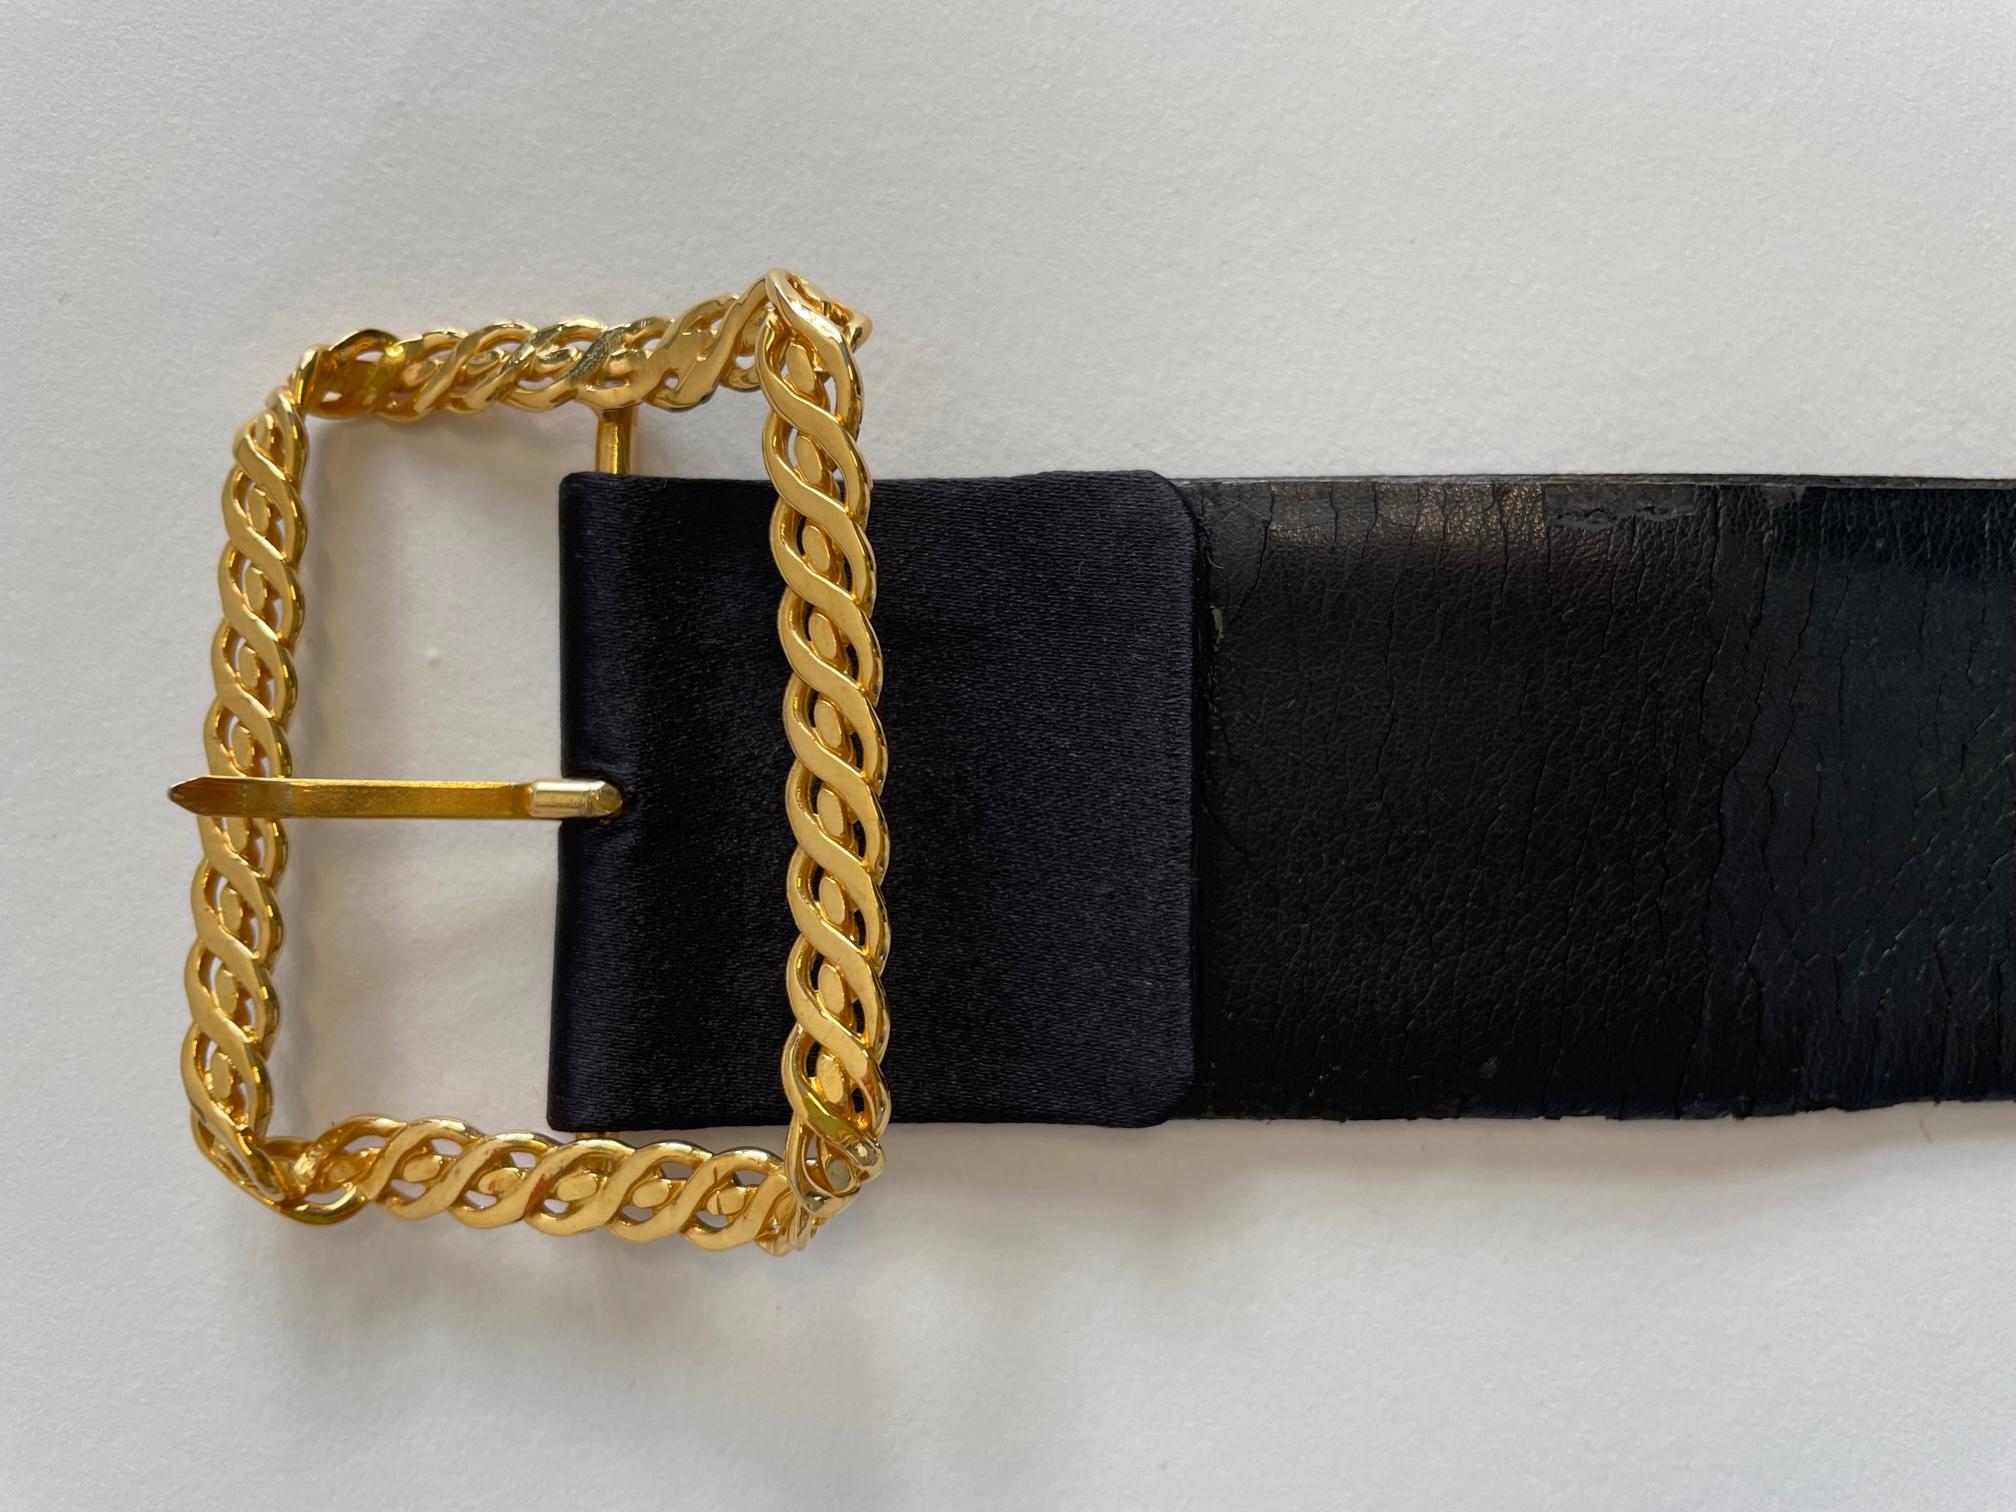 Chanel By Lagerfeld Silk Bow-Embellished Chainlink Coin Charm Waist Belt, FW1995 For Sale 15